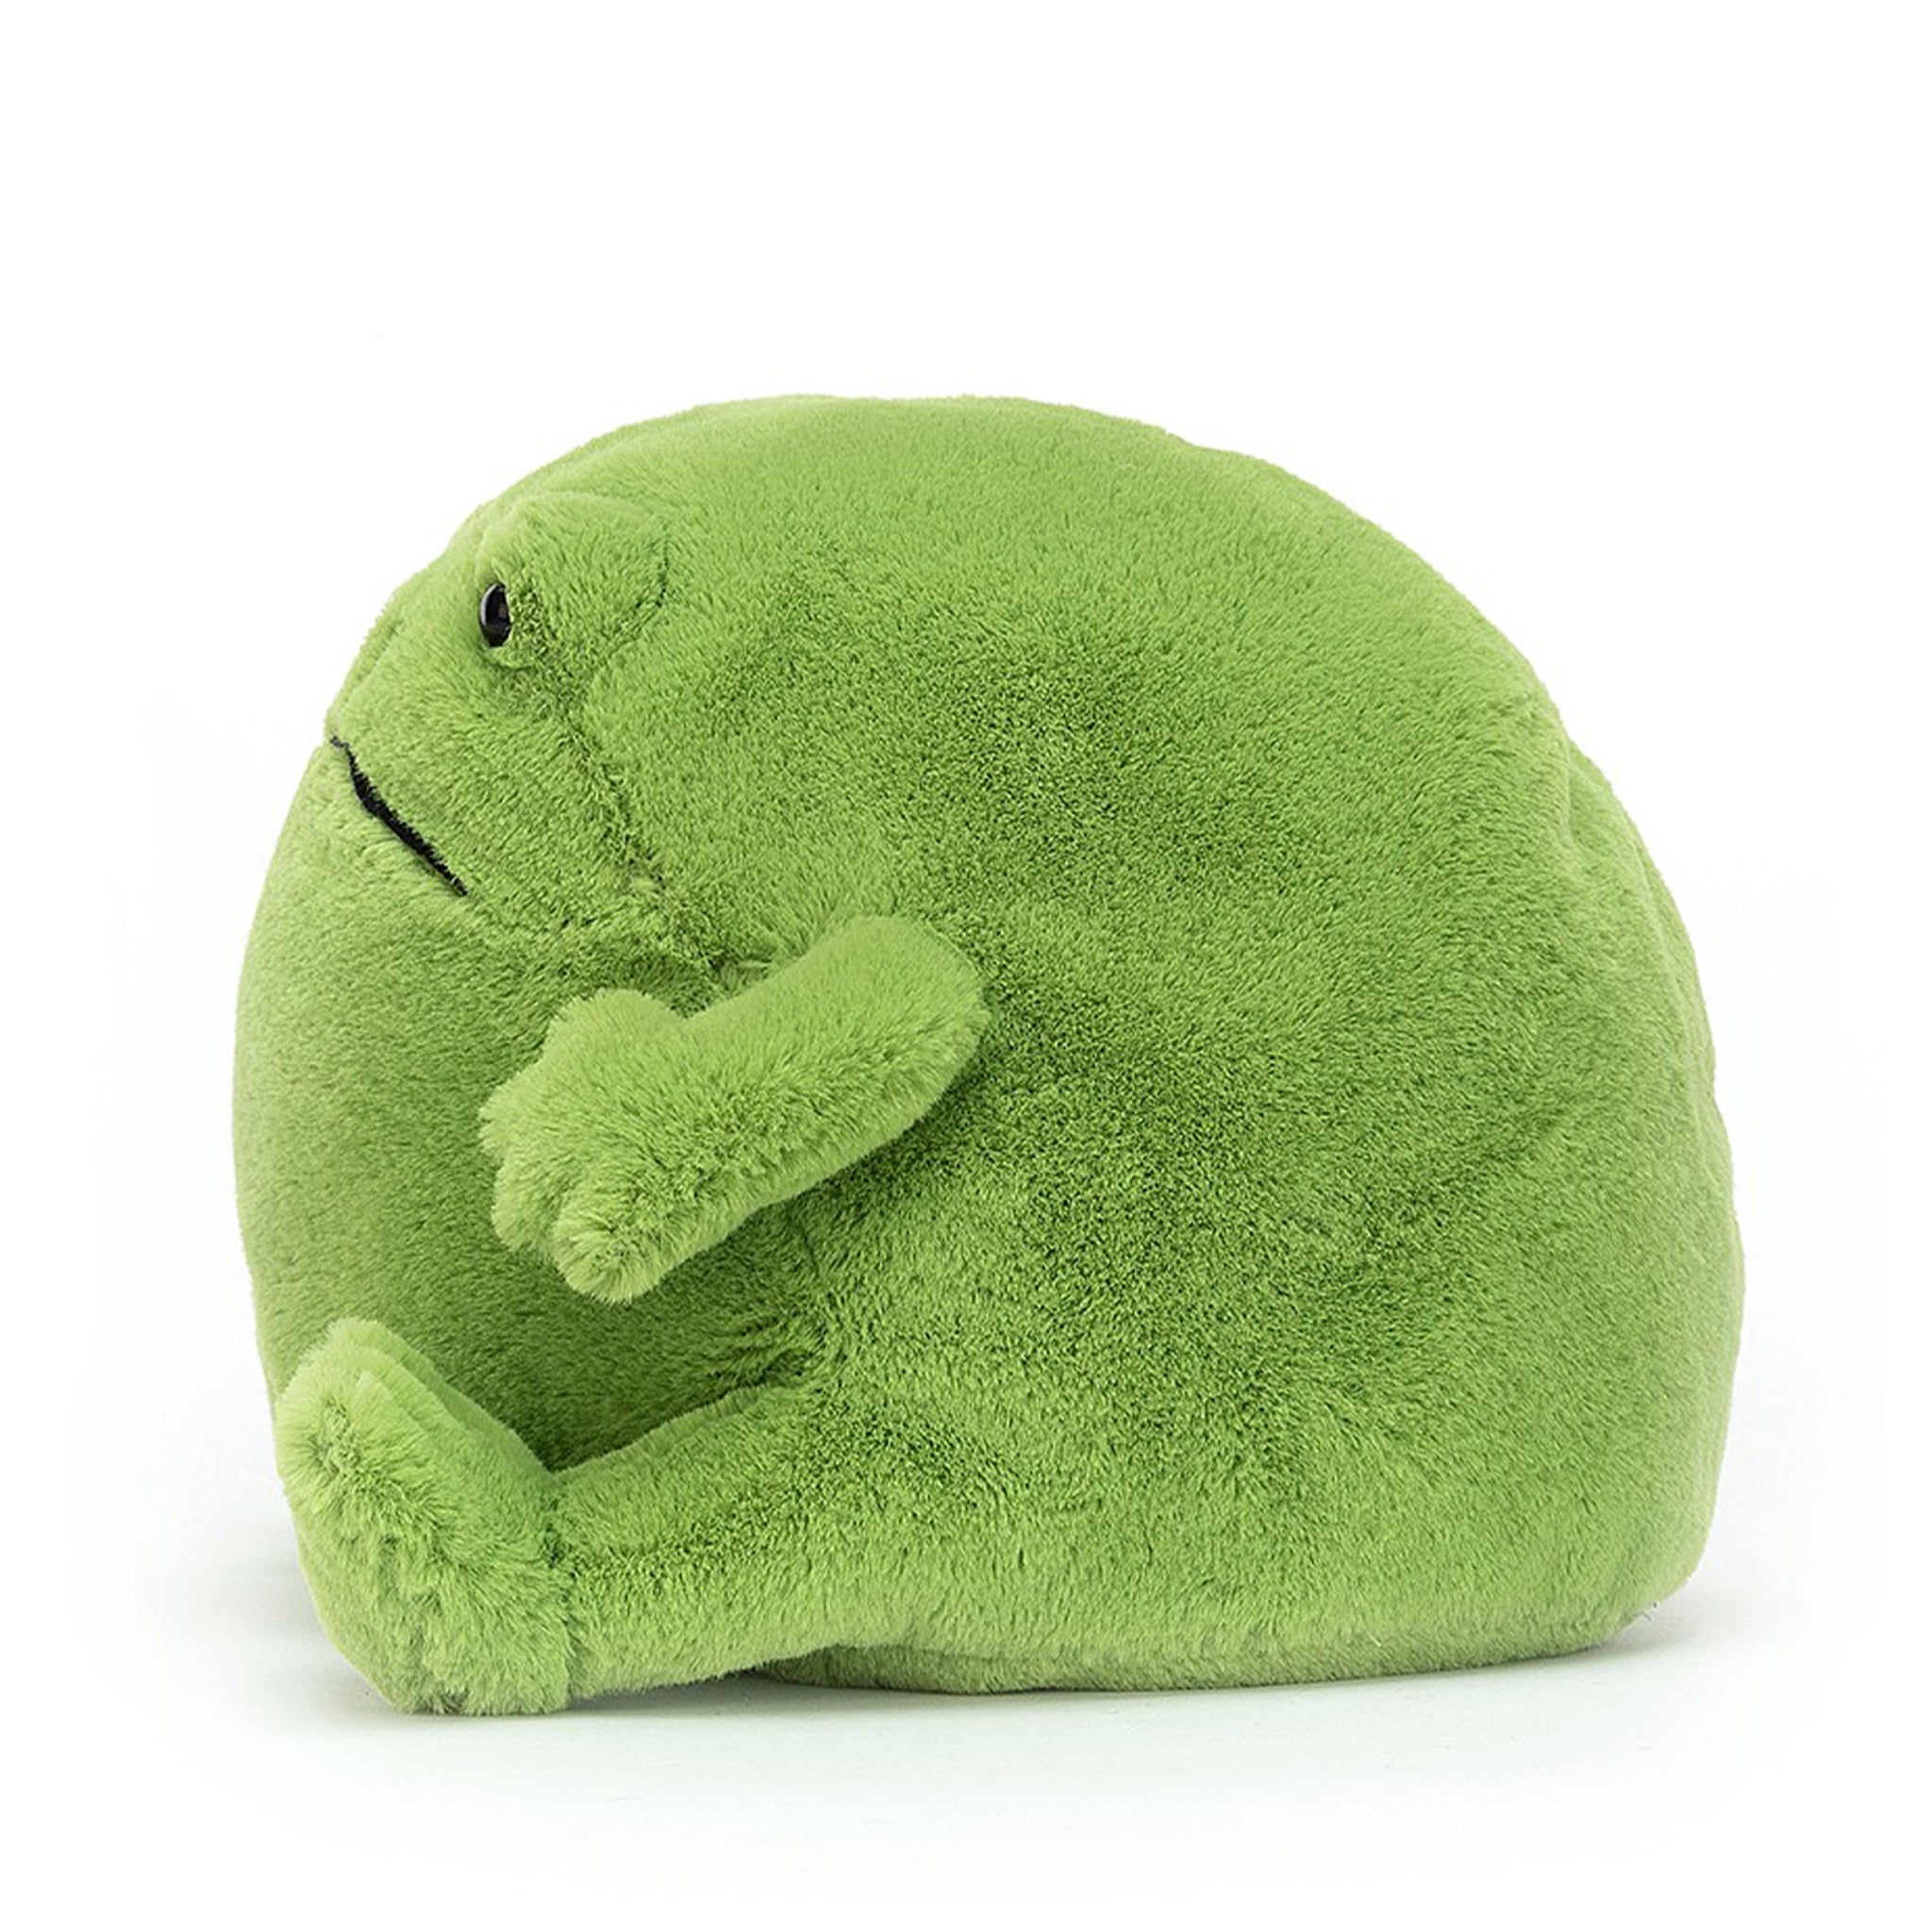 On a white background is a green frog stuffed animal with with a frown face.